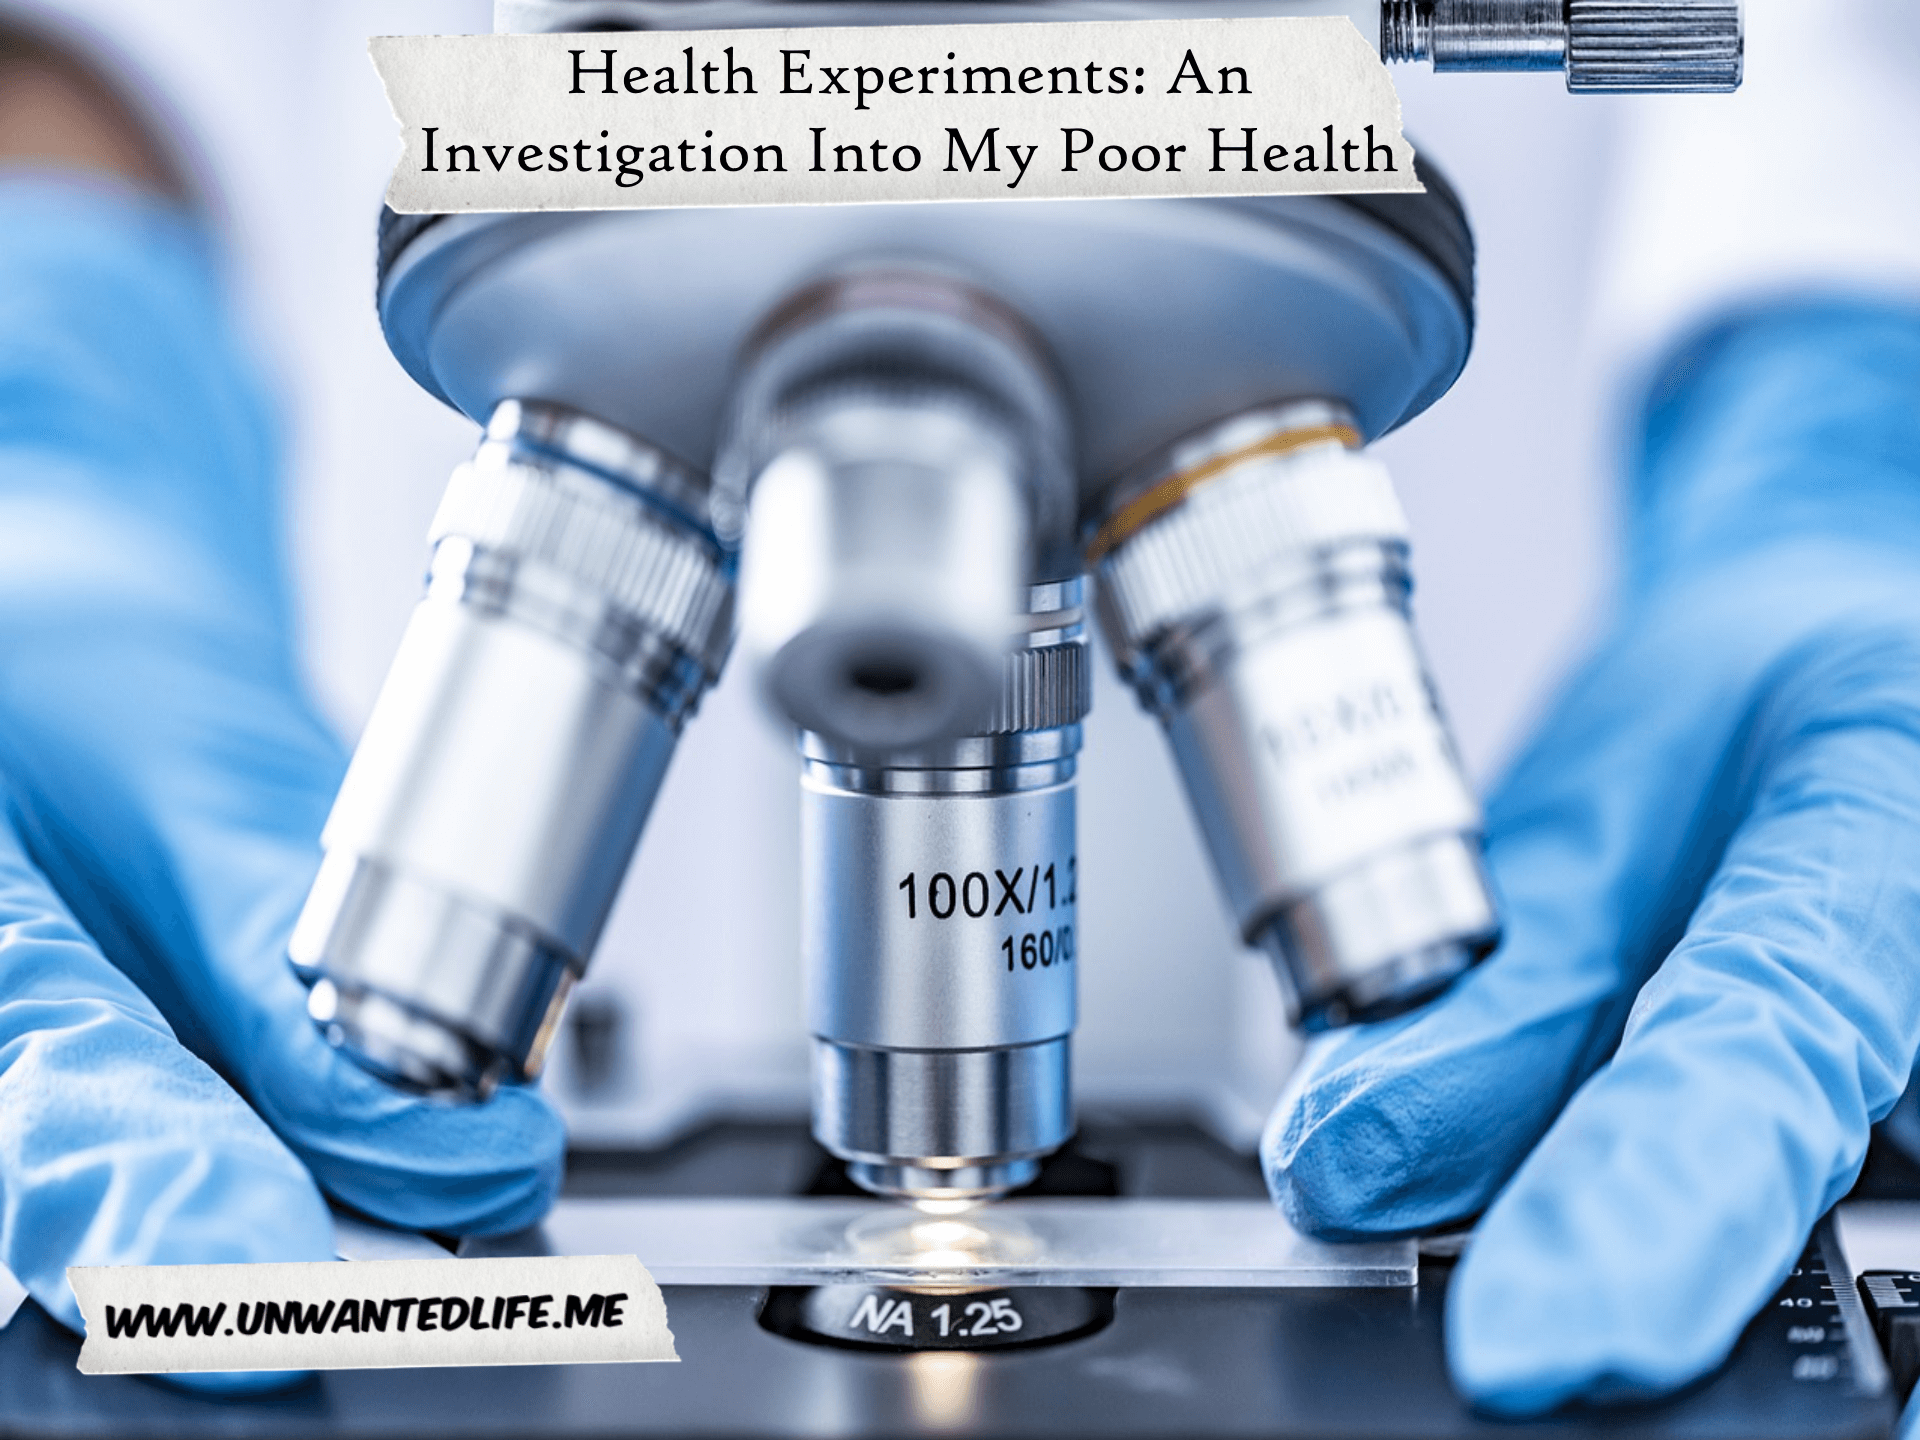 A closeup photo of someone using a a microscope with the title of the article - Health Experiments: An Investigation Into My Poor Health - across the top of the image